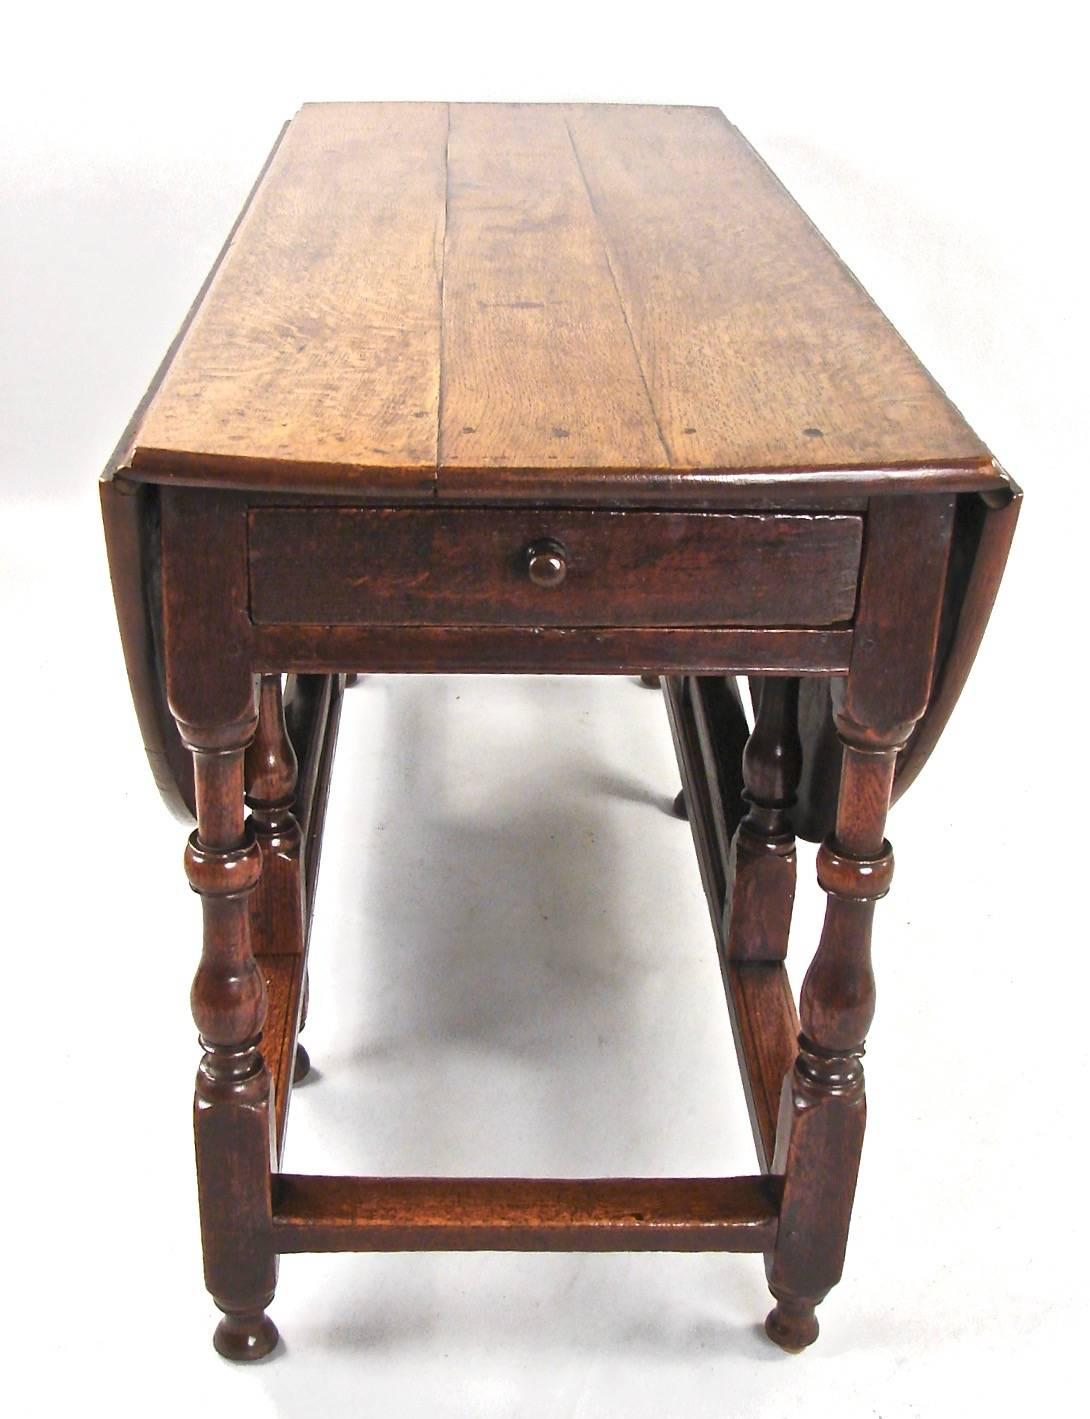 English Late 17th Century Oak Drop-Leaf Table with Drawer 1